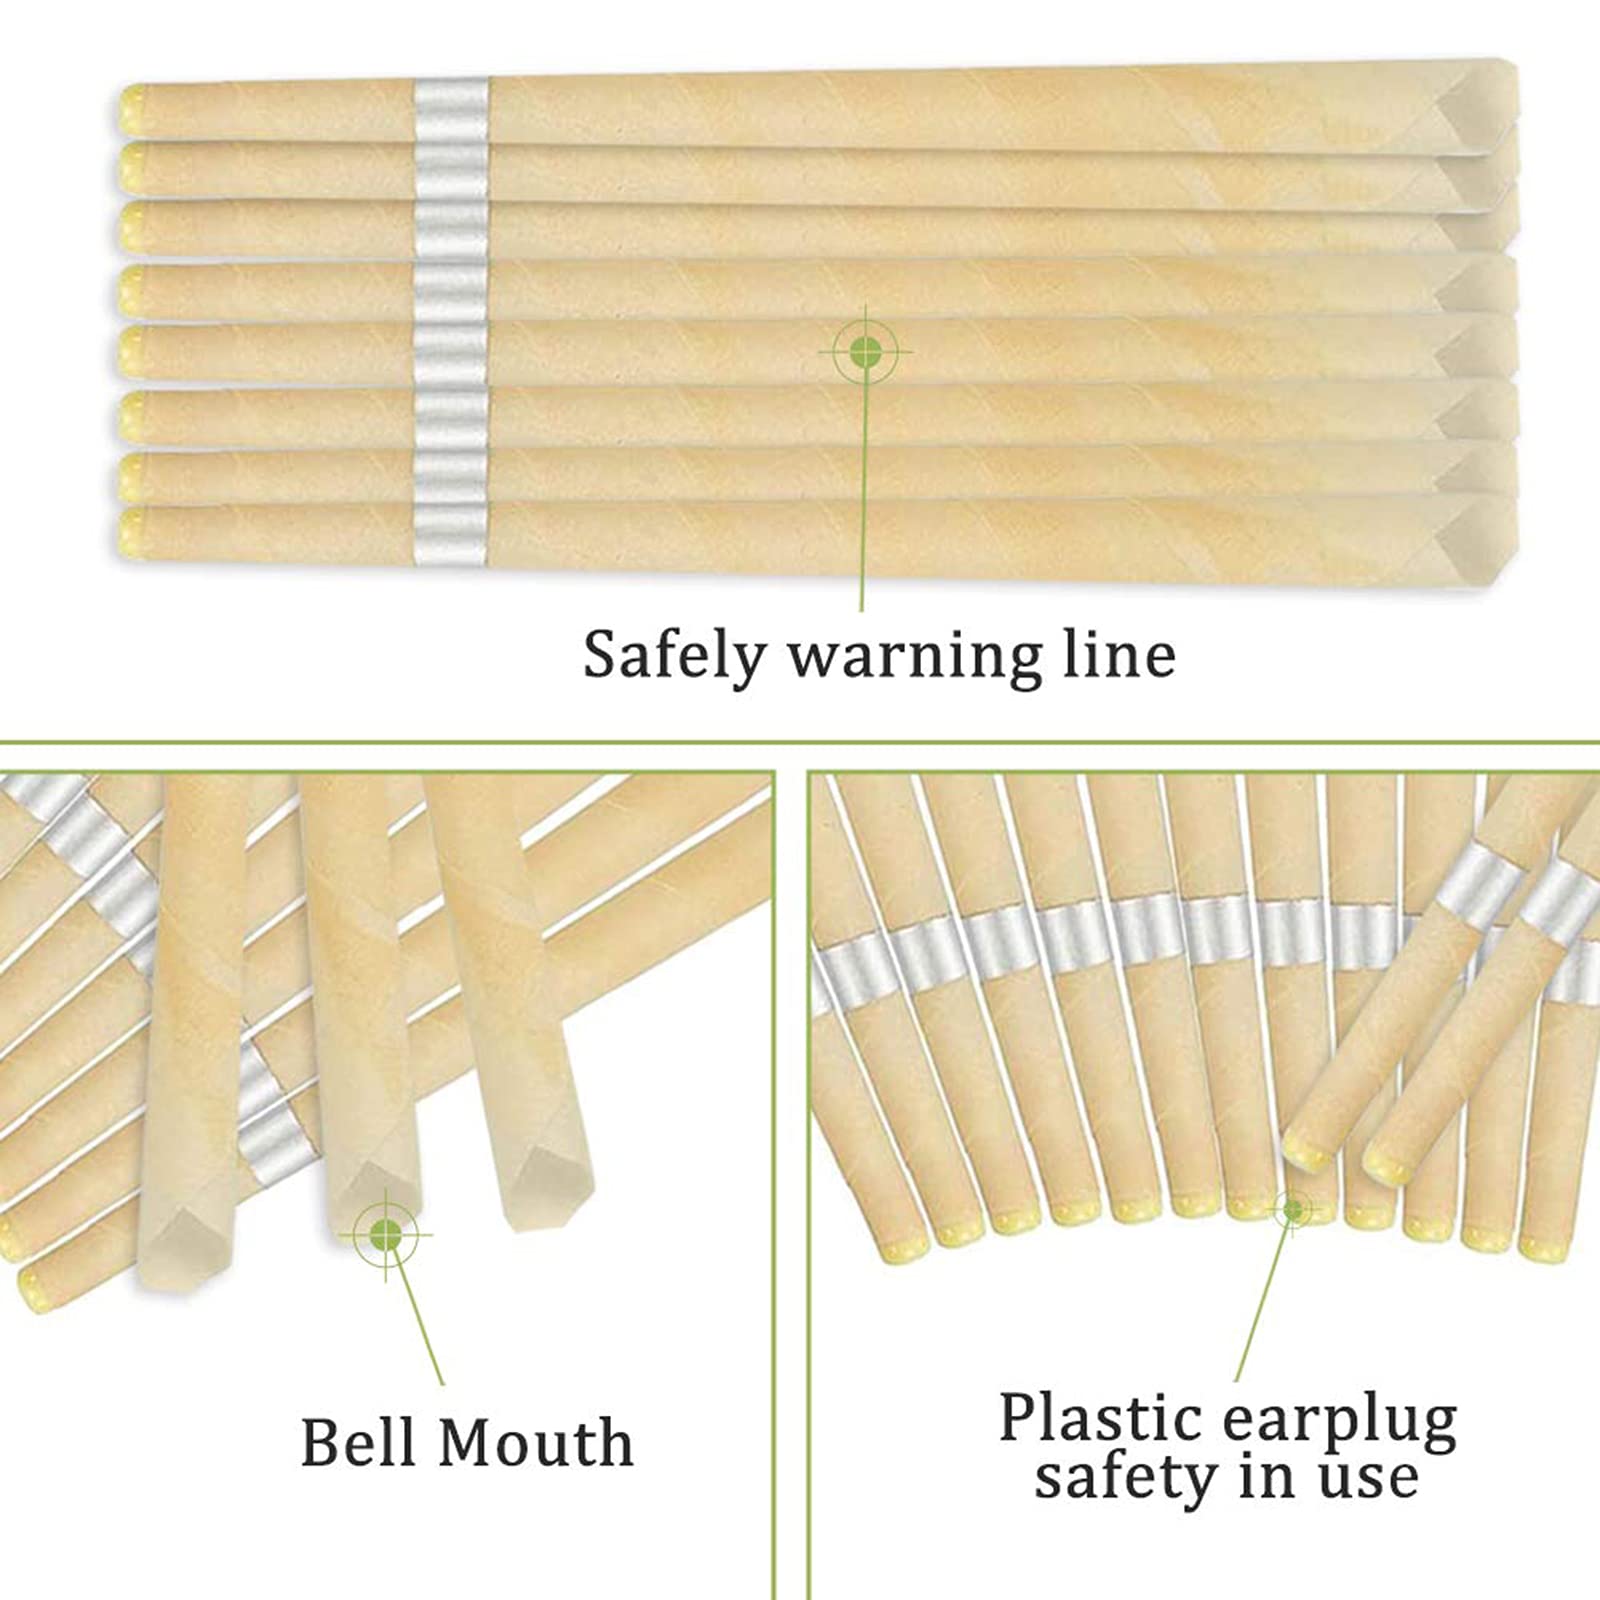 Beeswax Ear Wax Removal Candles, Set of 10 Ear Candles Wax Removal Ear Wax Removal Candles for Ear Cleaning Ear Candles Wax Removal Ear Candles for Ear Candling Wax Removal Ear Wax Removal for Adult